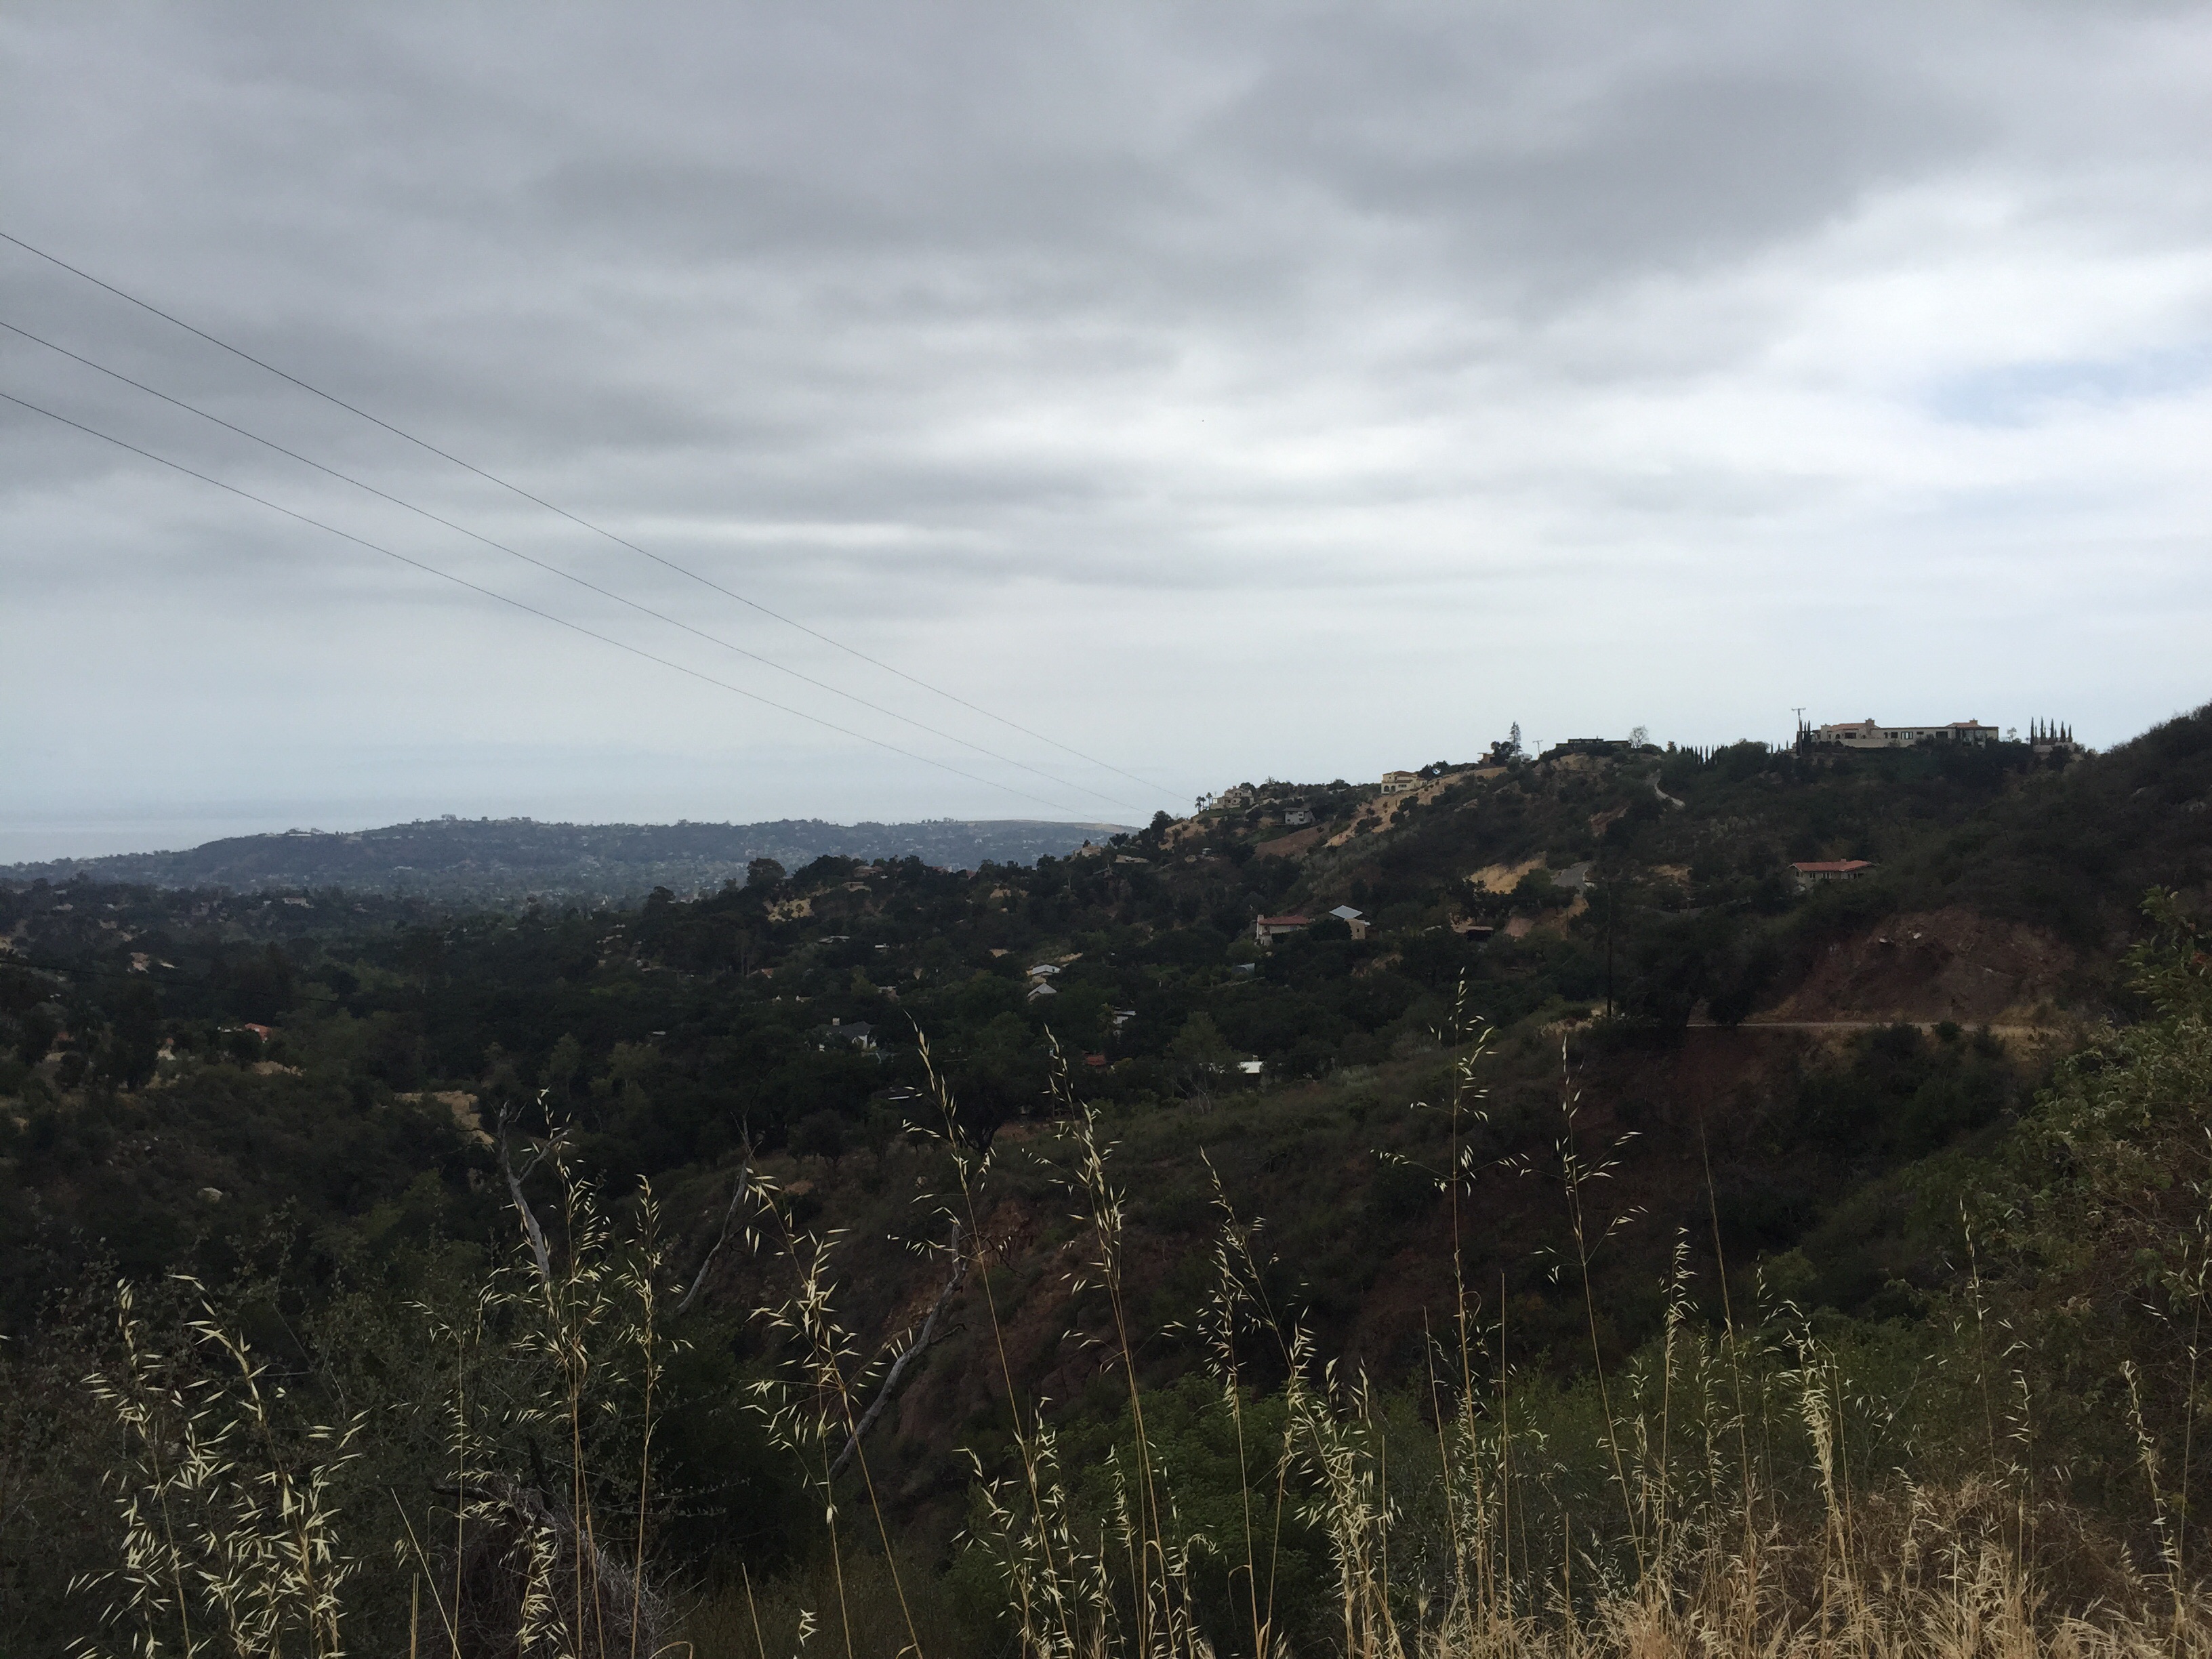 Rainy days and gray clouds calls for a Red Rocks hike. Here's a POV perspective from the top of the world in beautiful Santa Barbara. - Niklas Knoph